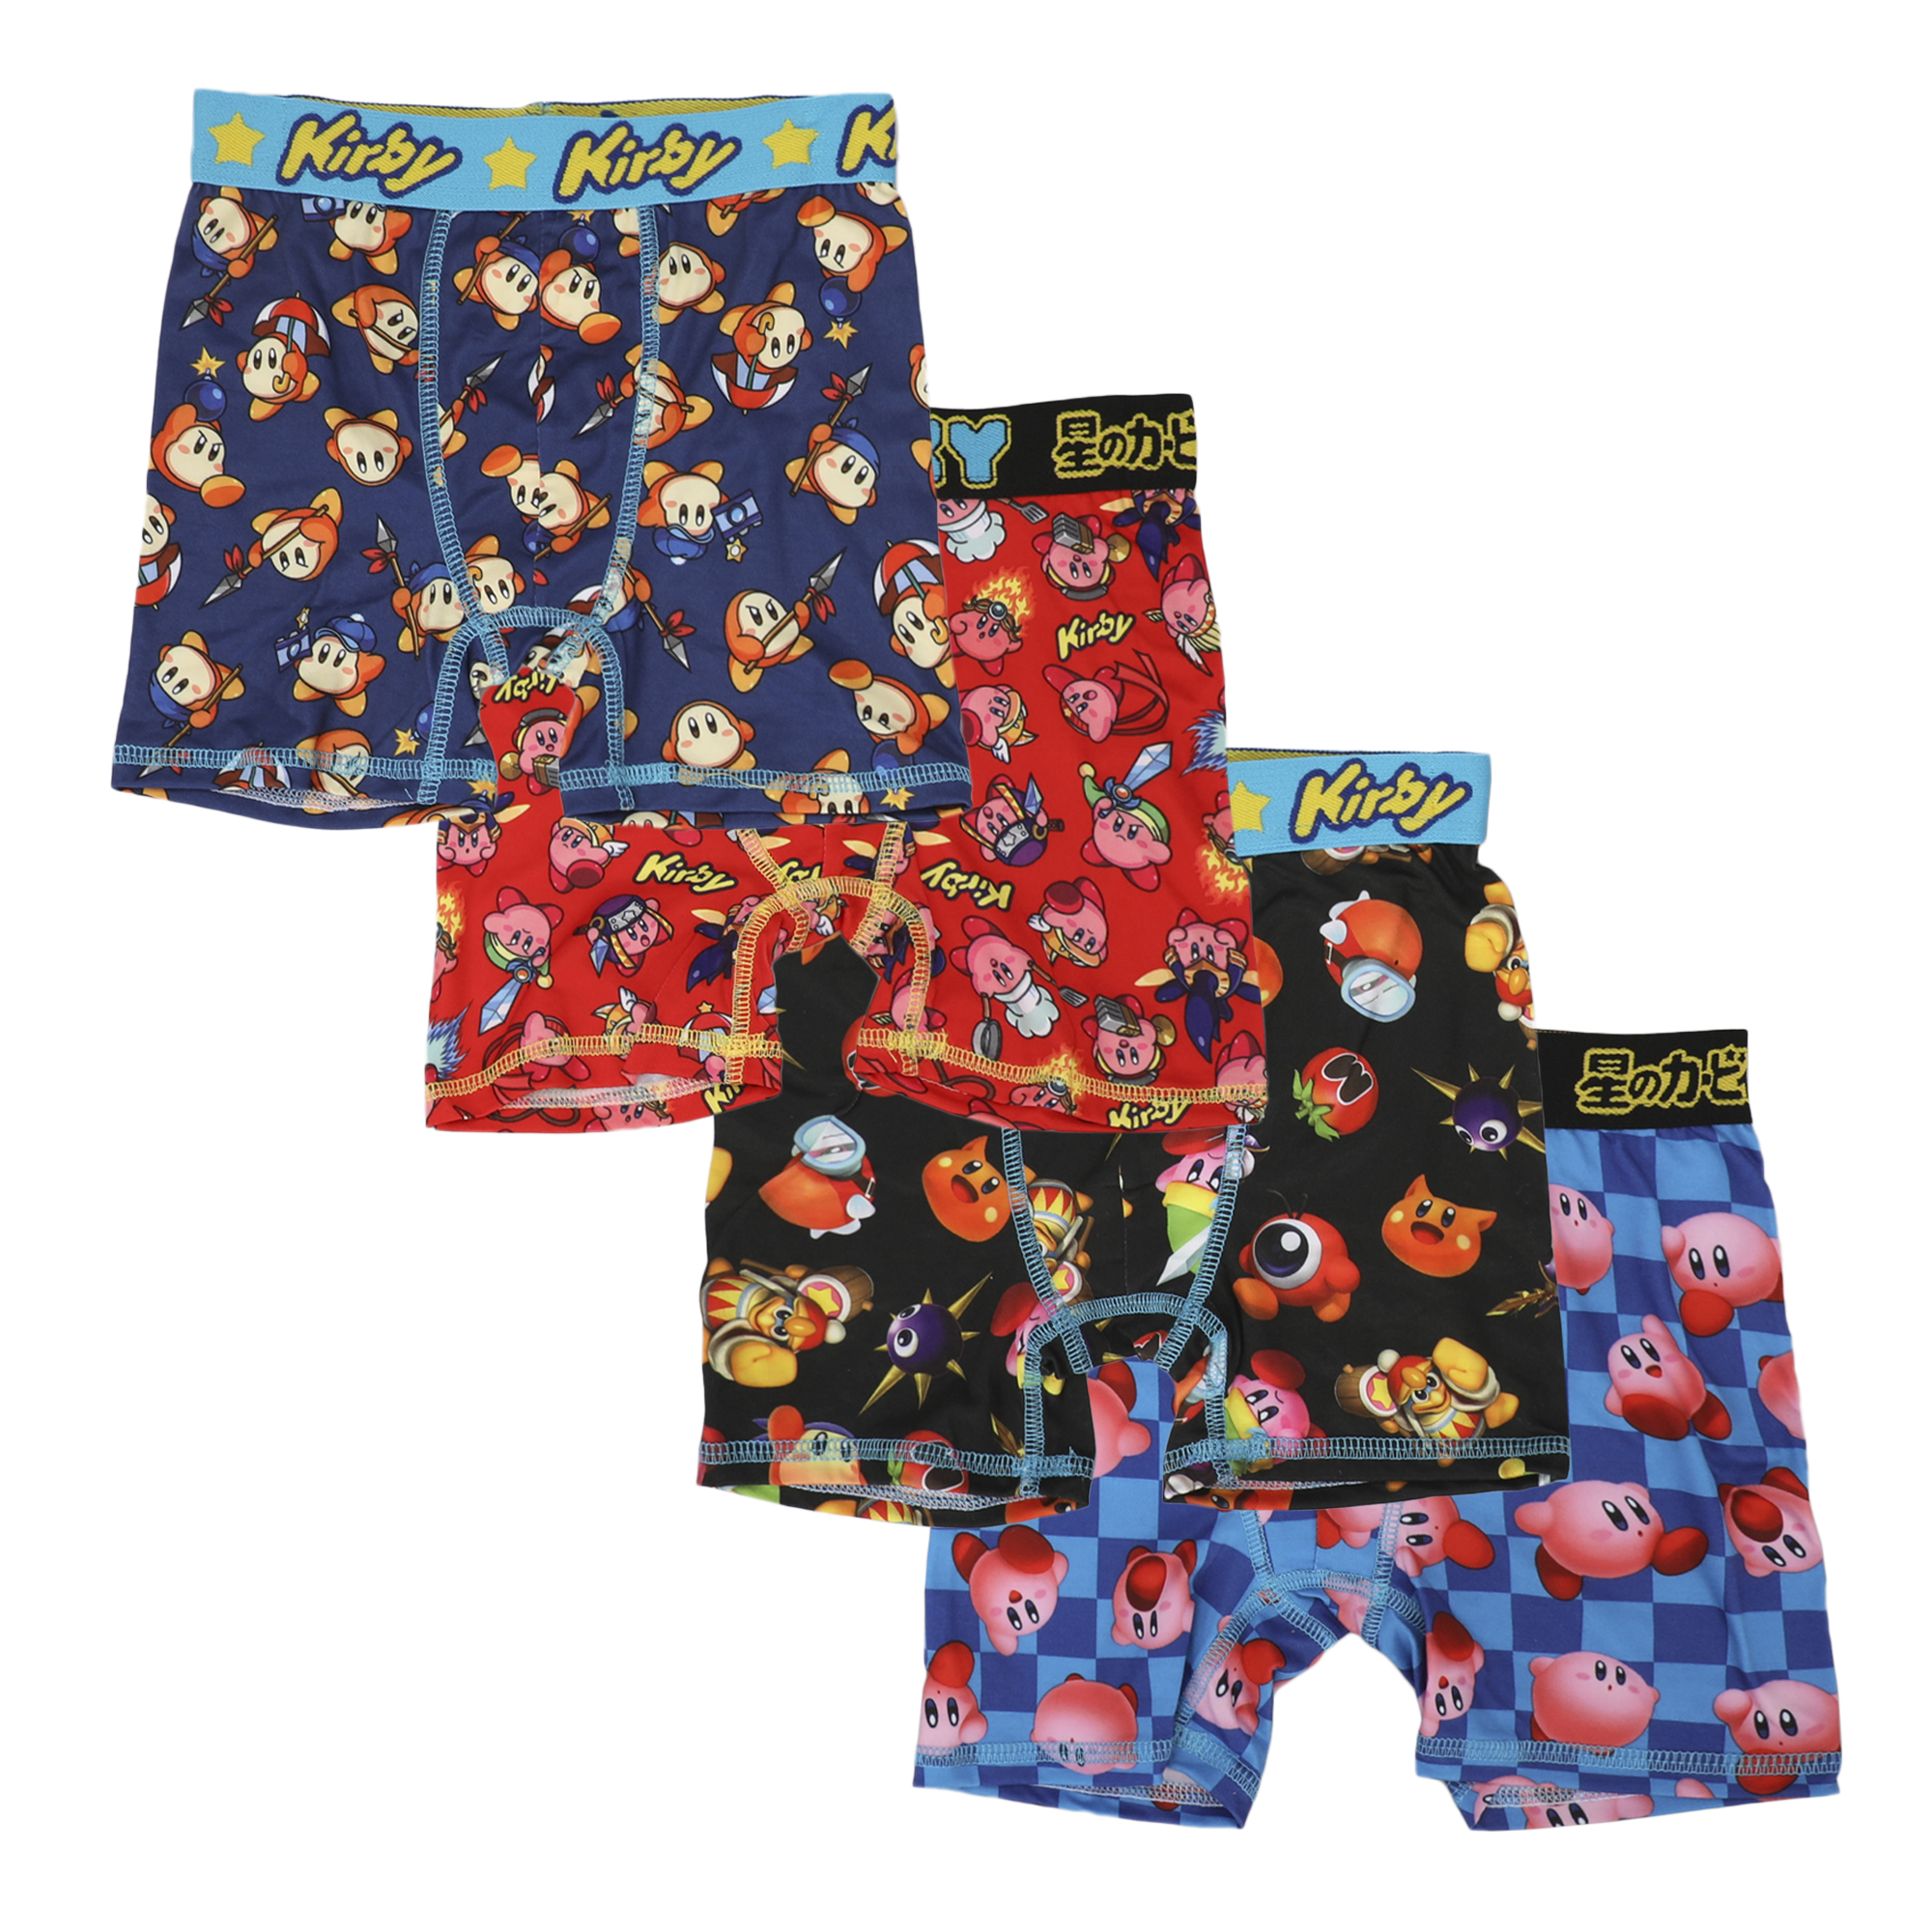 Kirby Characters & Power Ups 4-Pack Boy's Boxer Briefs-4 - image 1 of 5